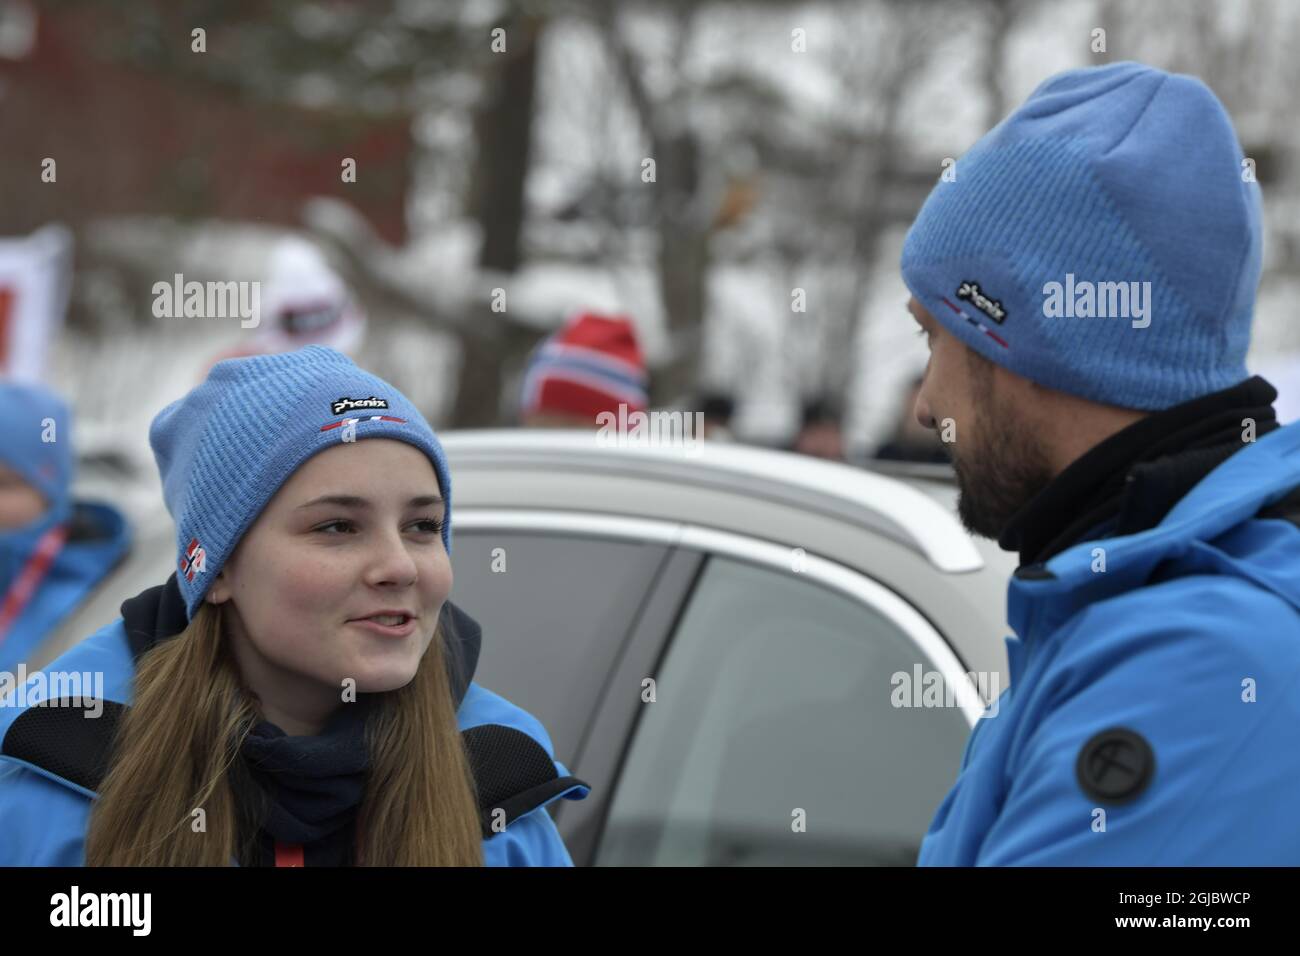 Princess Ingrid-Alexandra and Crown Prince Haakon of Norway during the WC Alpine in Are Sweden on February 9, 2019 Foto: Pontus Lundahl / TT / kod 10050  Stock Photo